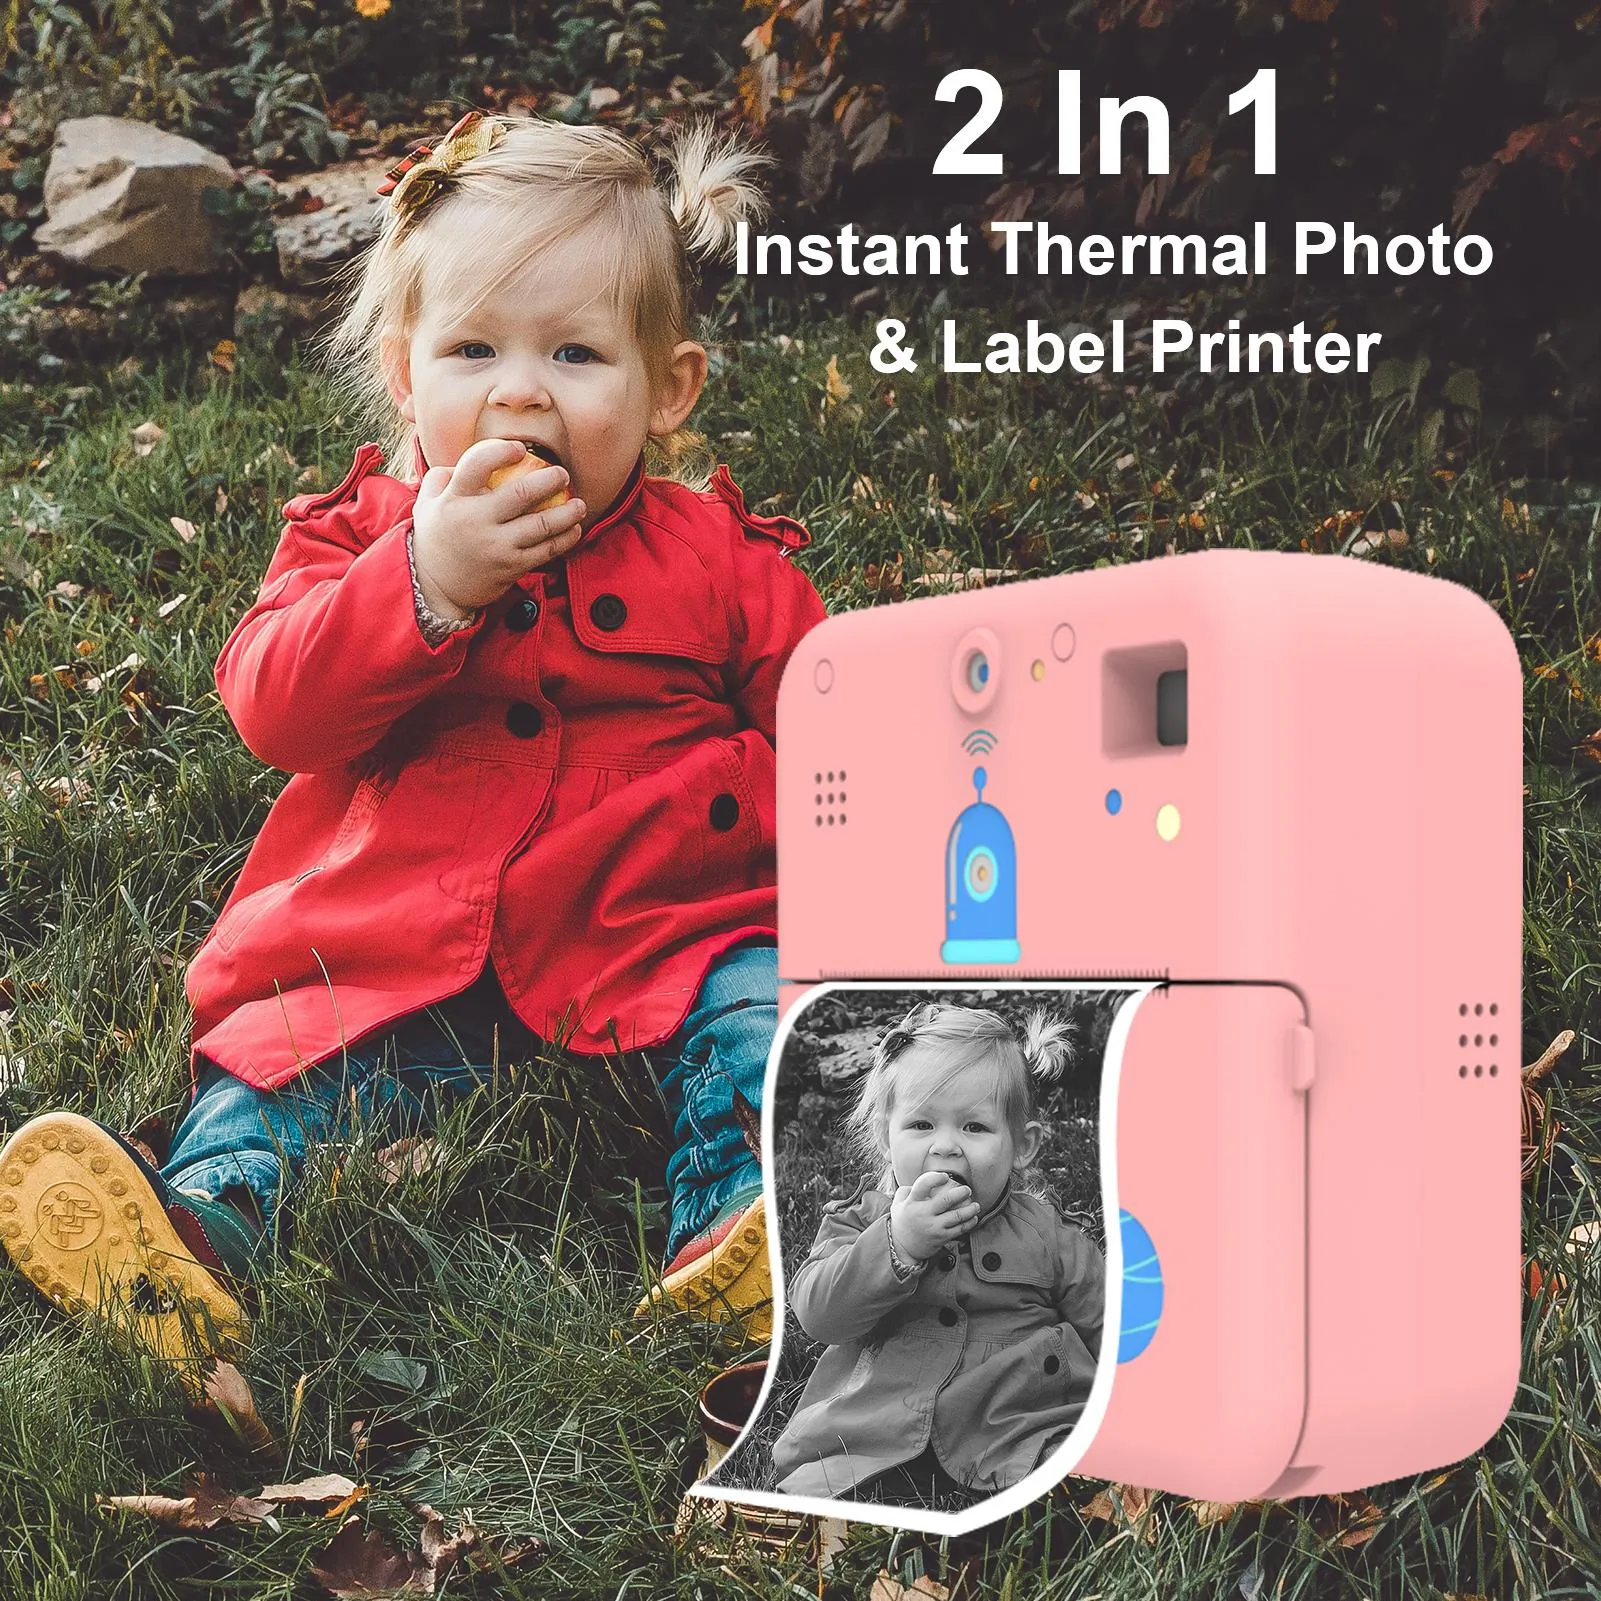 Printers Mini Pocket Printer Camera Instant Print Portable Thermal Printing Machine Wireless BT Connection for Picture Label Handcraft